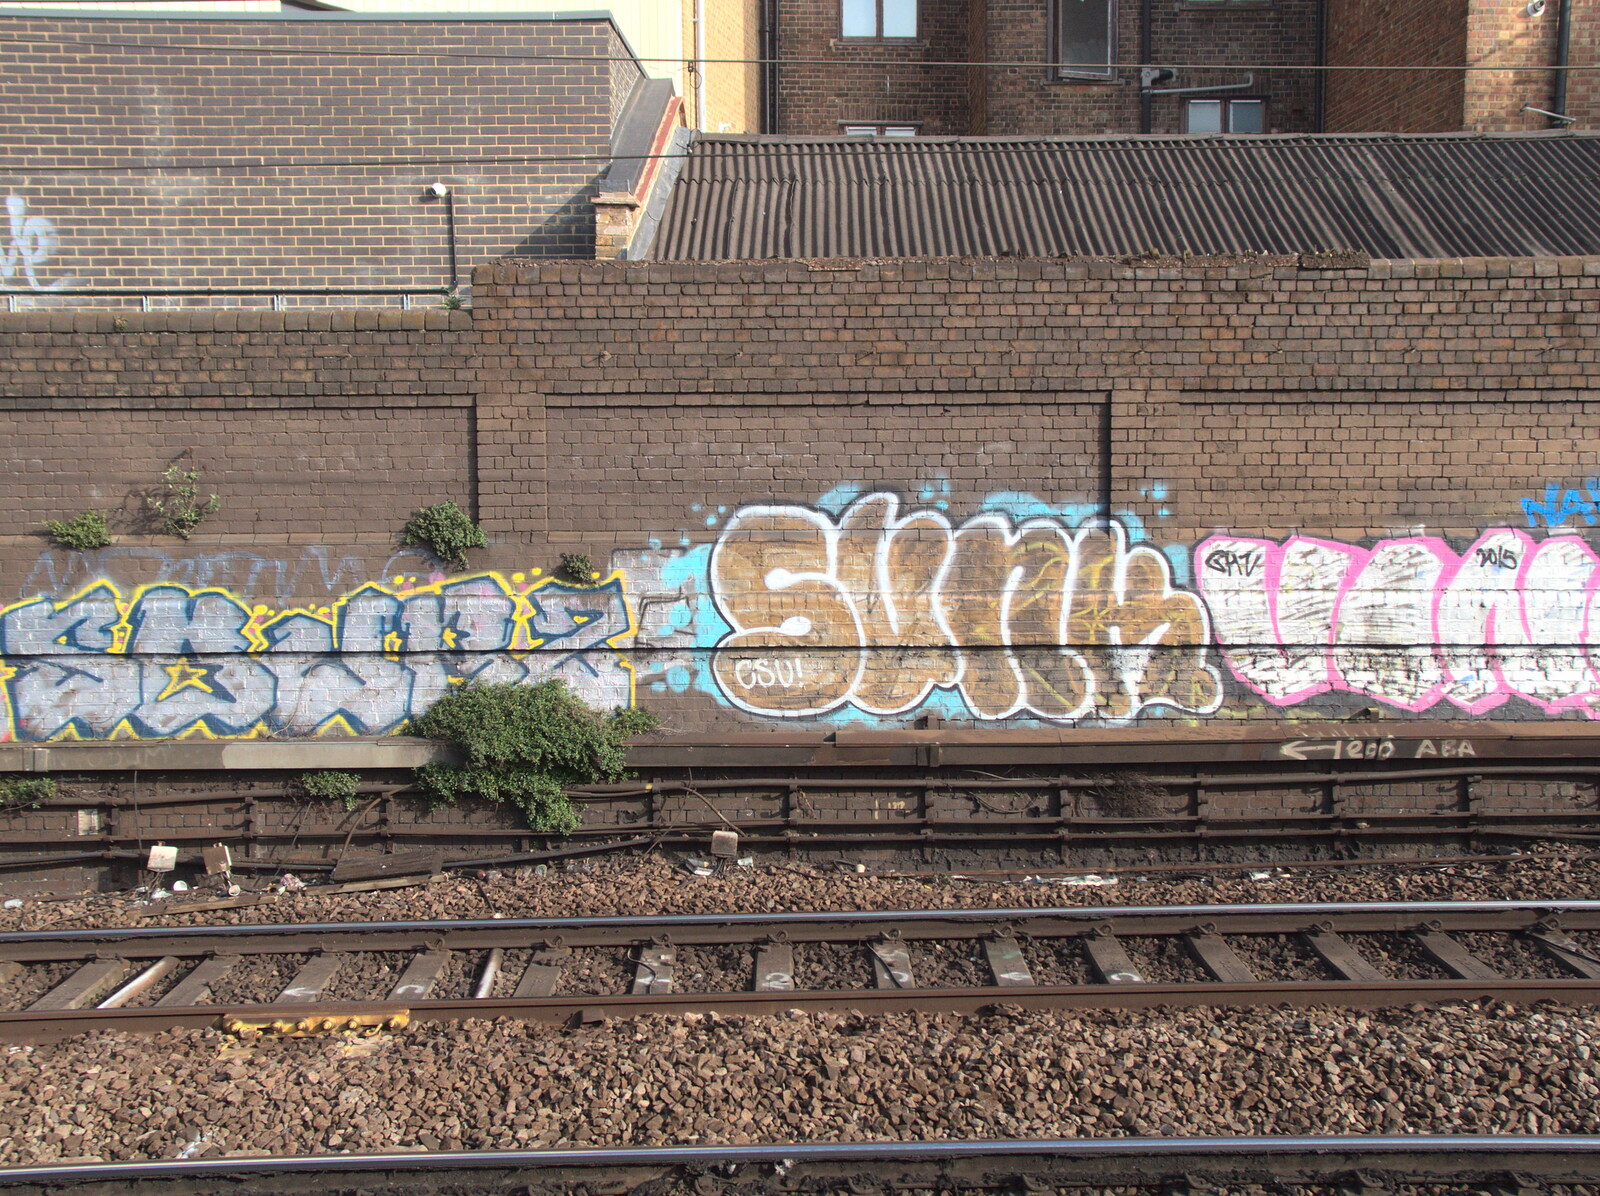 Railway graffiti from Digger Action and other March Miscellany, Suffolk and London - 21st March 2017